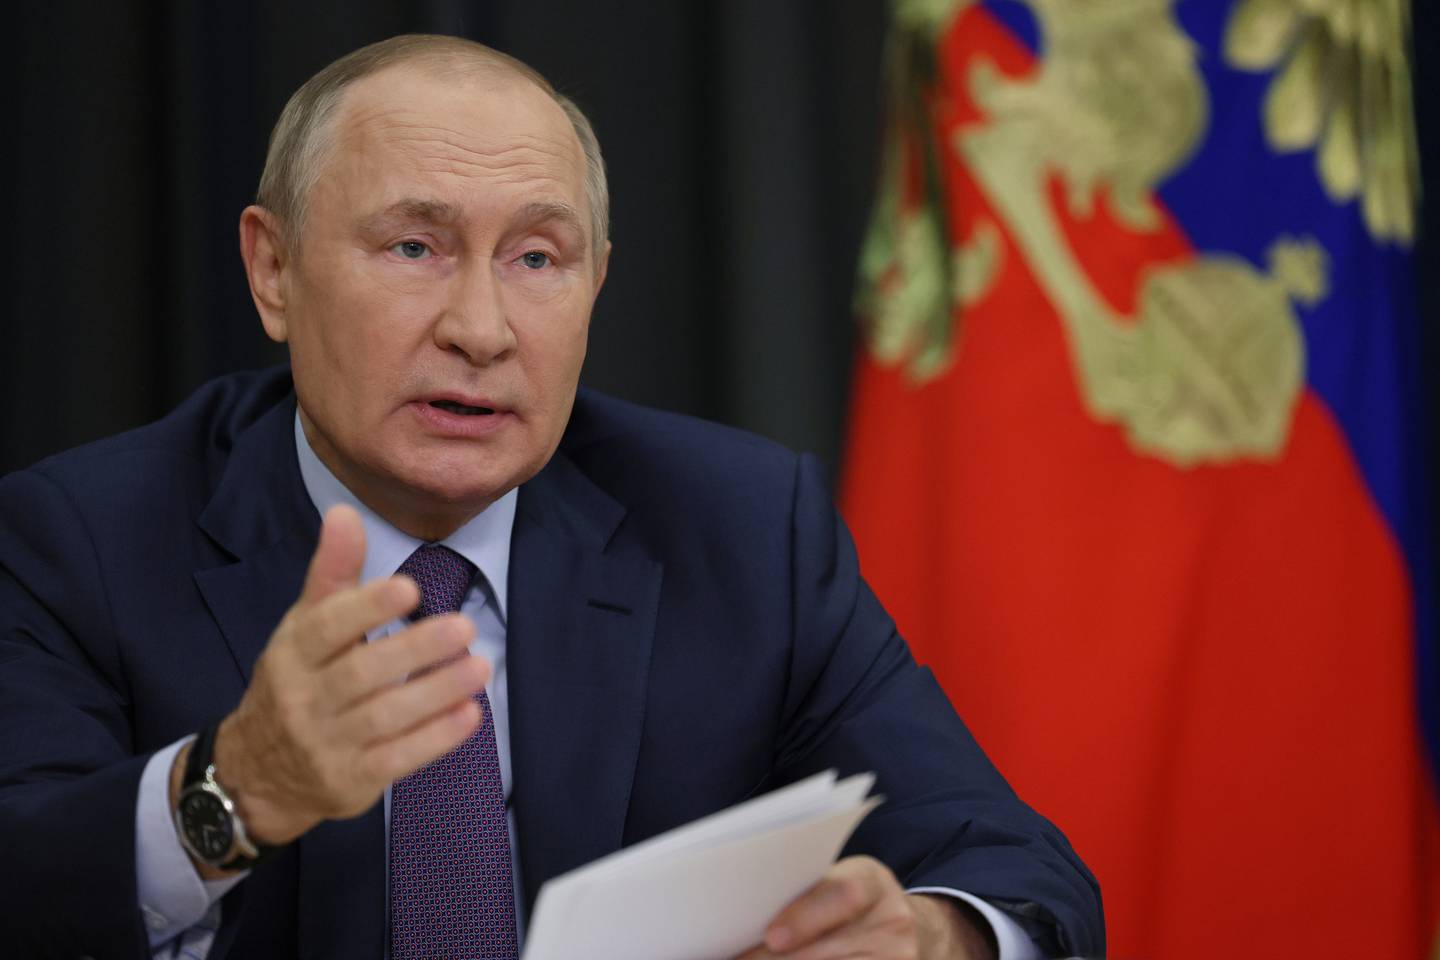 Russian President Vladimir Putin gestures as he attends a meeting on agricultural issues via videoconference in the Bocharov Ruchei residence in the Black Sea resort of Sochi, Russia, Tuesday, Sept.  27, 2022.  (Gavriil Grigorov, Sputnik, Kremlin Pool Photo via AP)